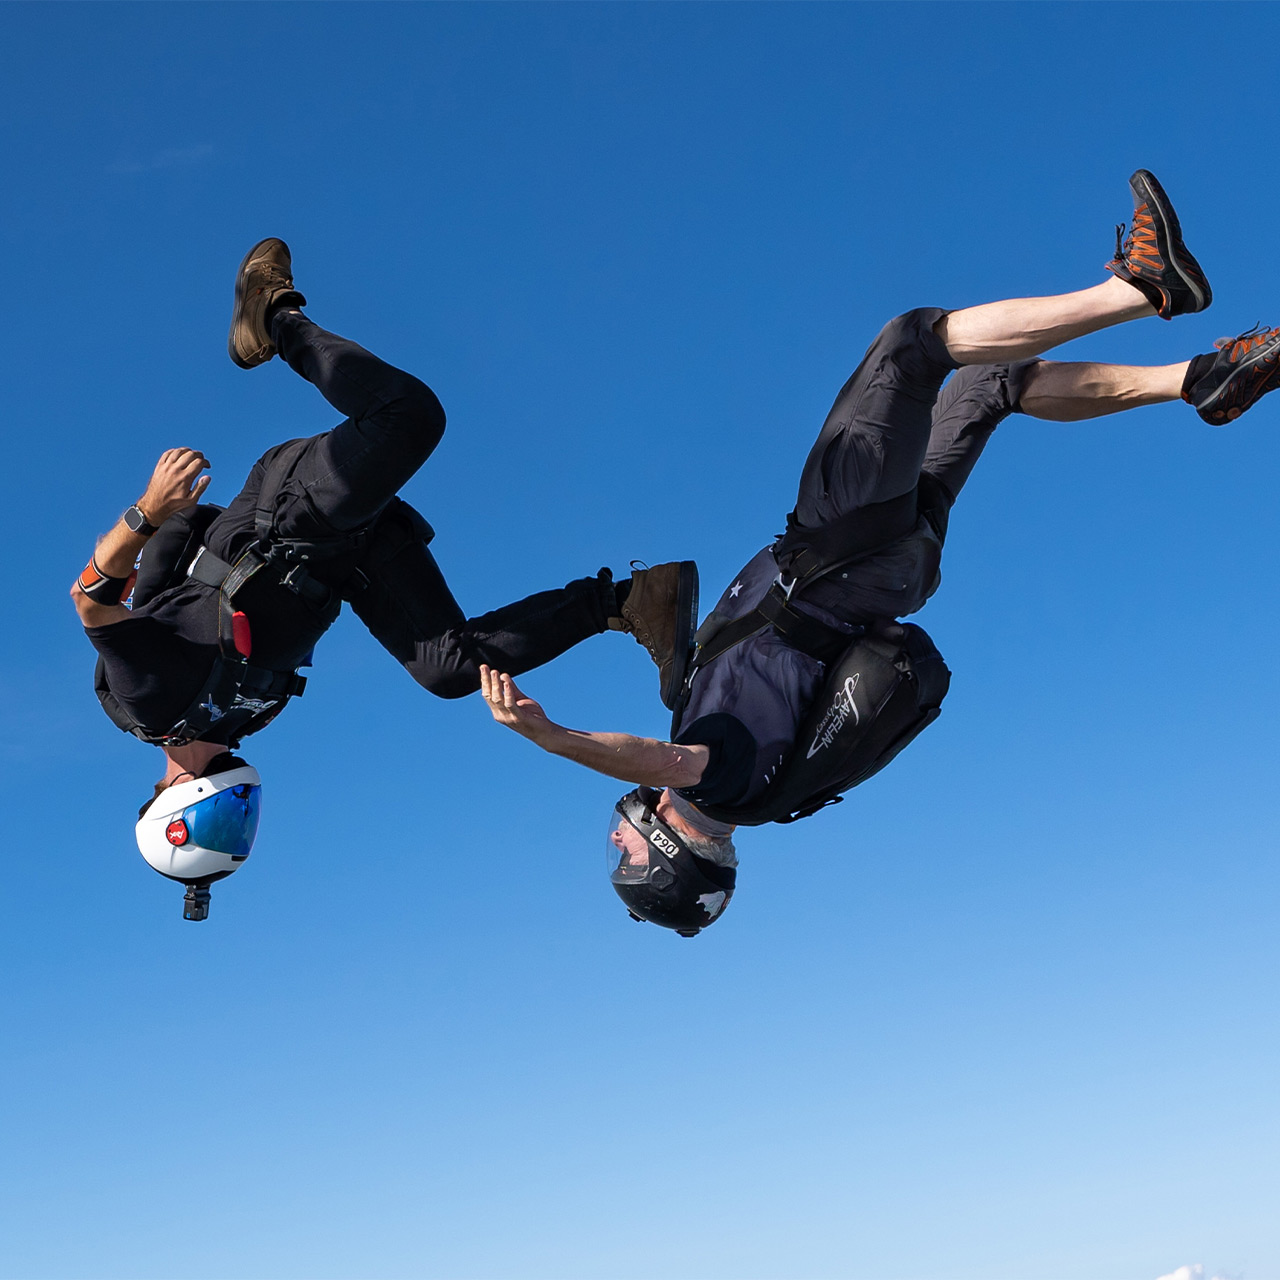 Two skydivers angle flying with one placing his food on the chest of the other simulating sky surfing